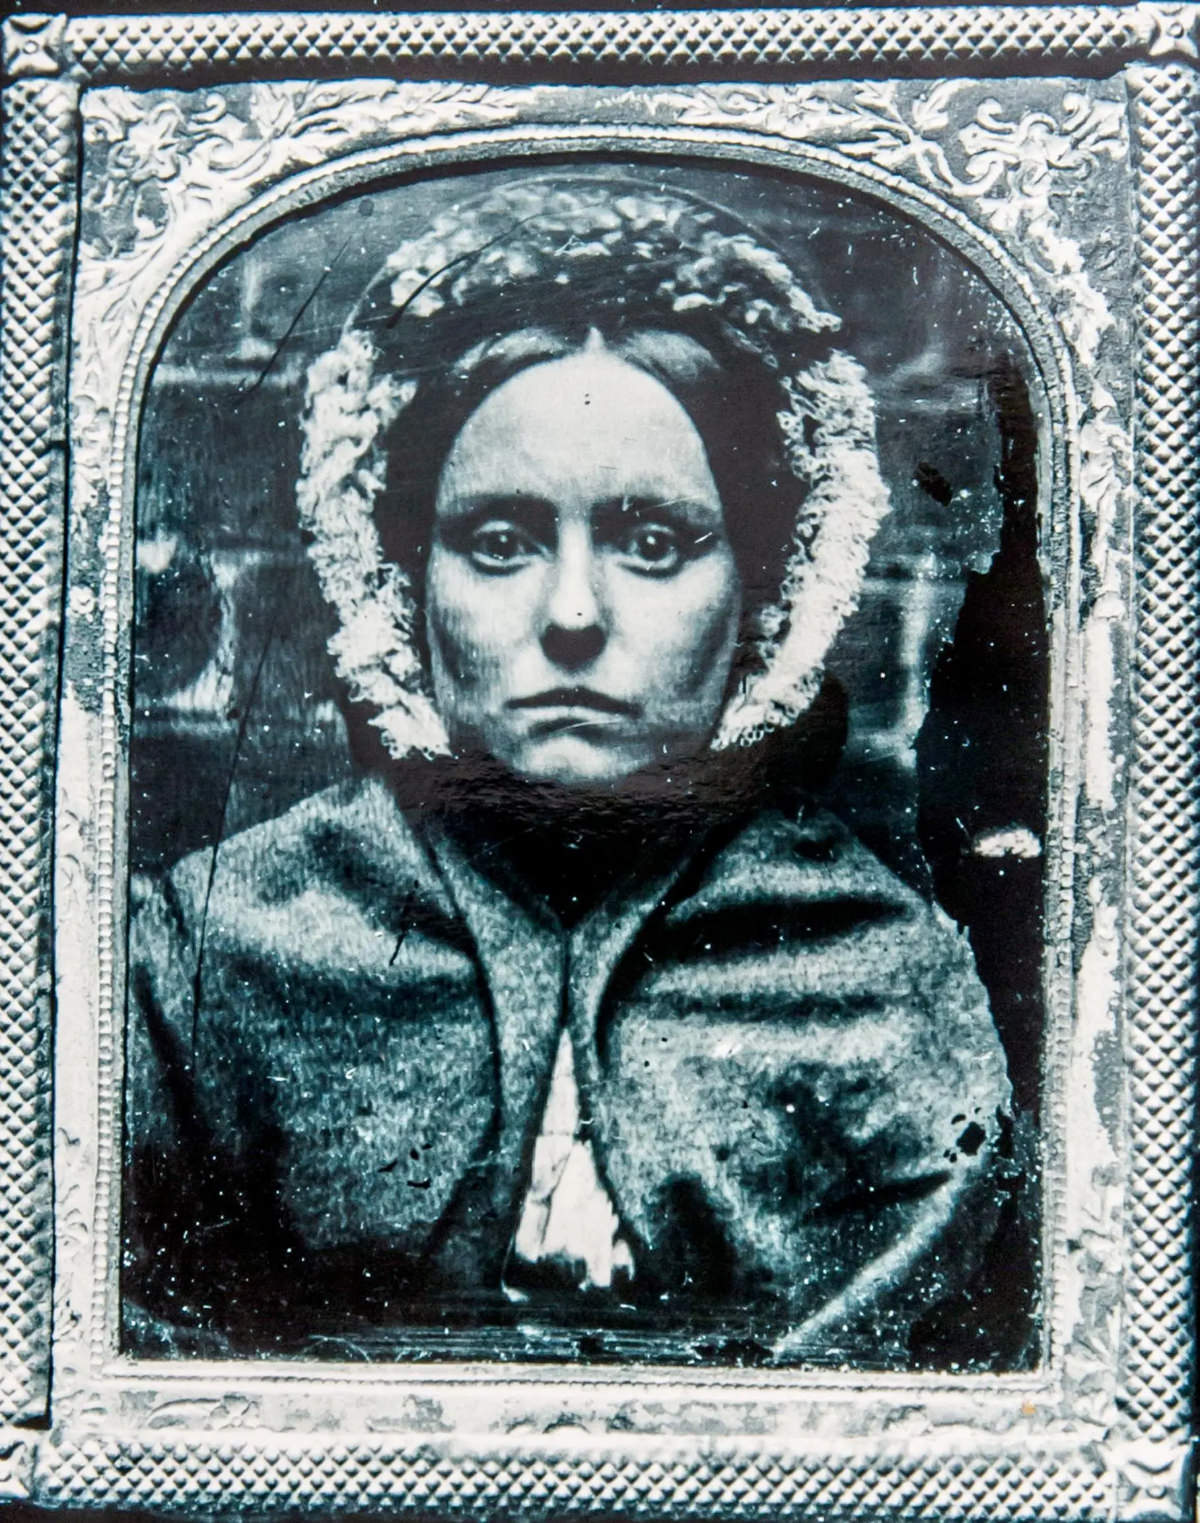 Ann Vickers was pictured after stealing a watch from a person in May 1862.